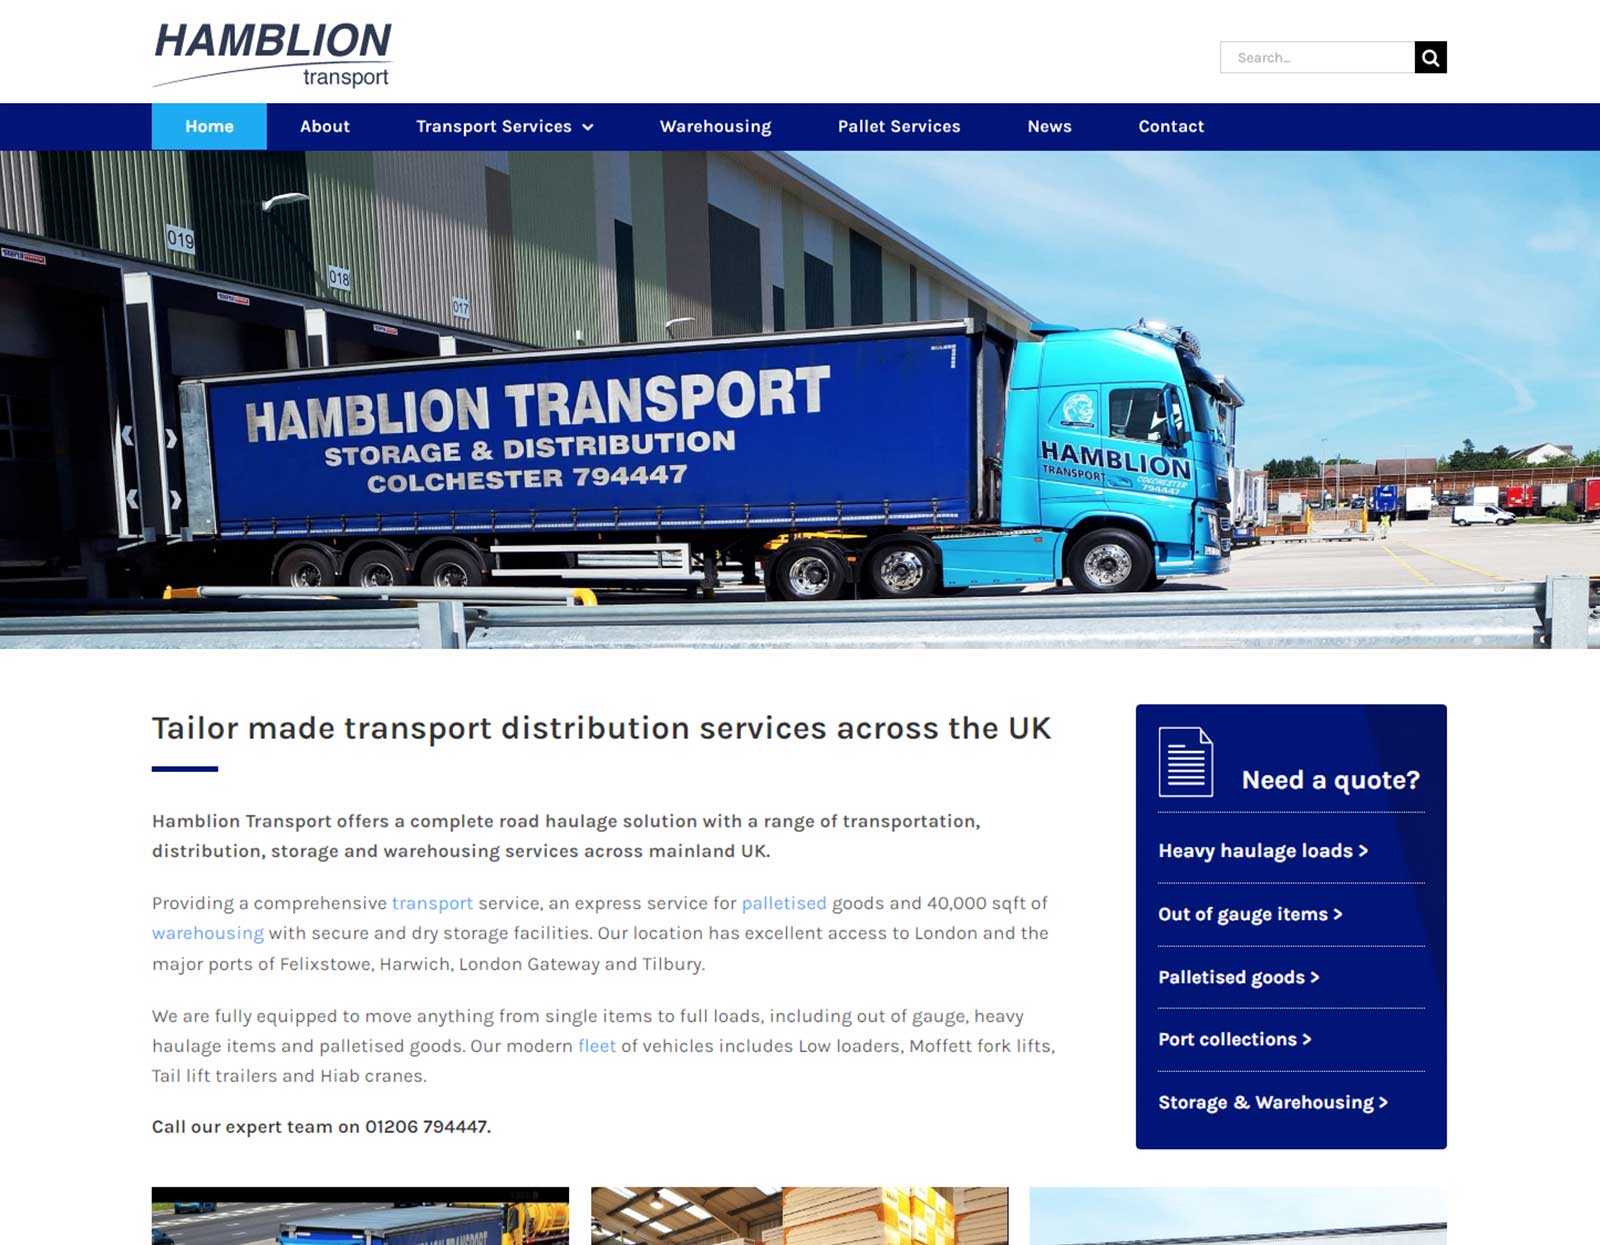 Image of web design for Hamblion Transport, showing the website home page.